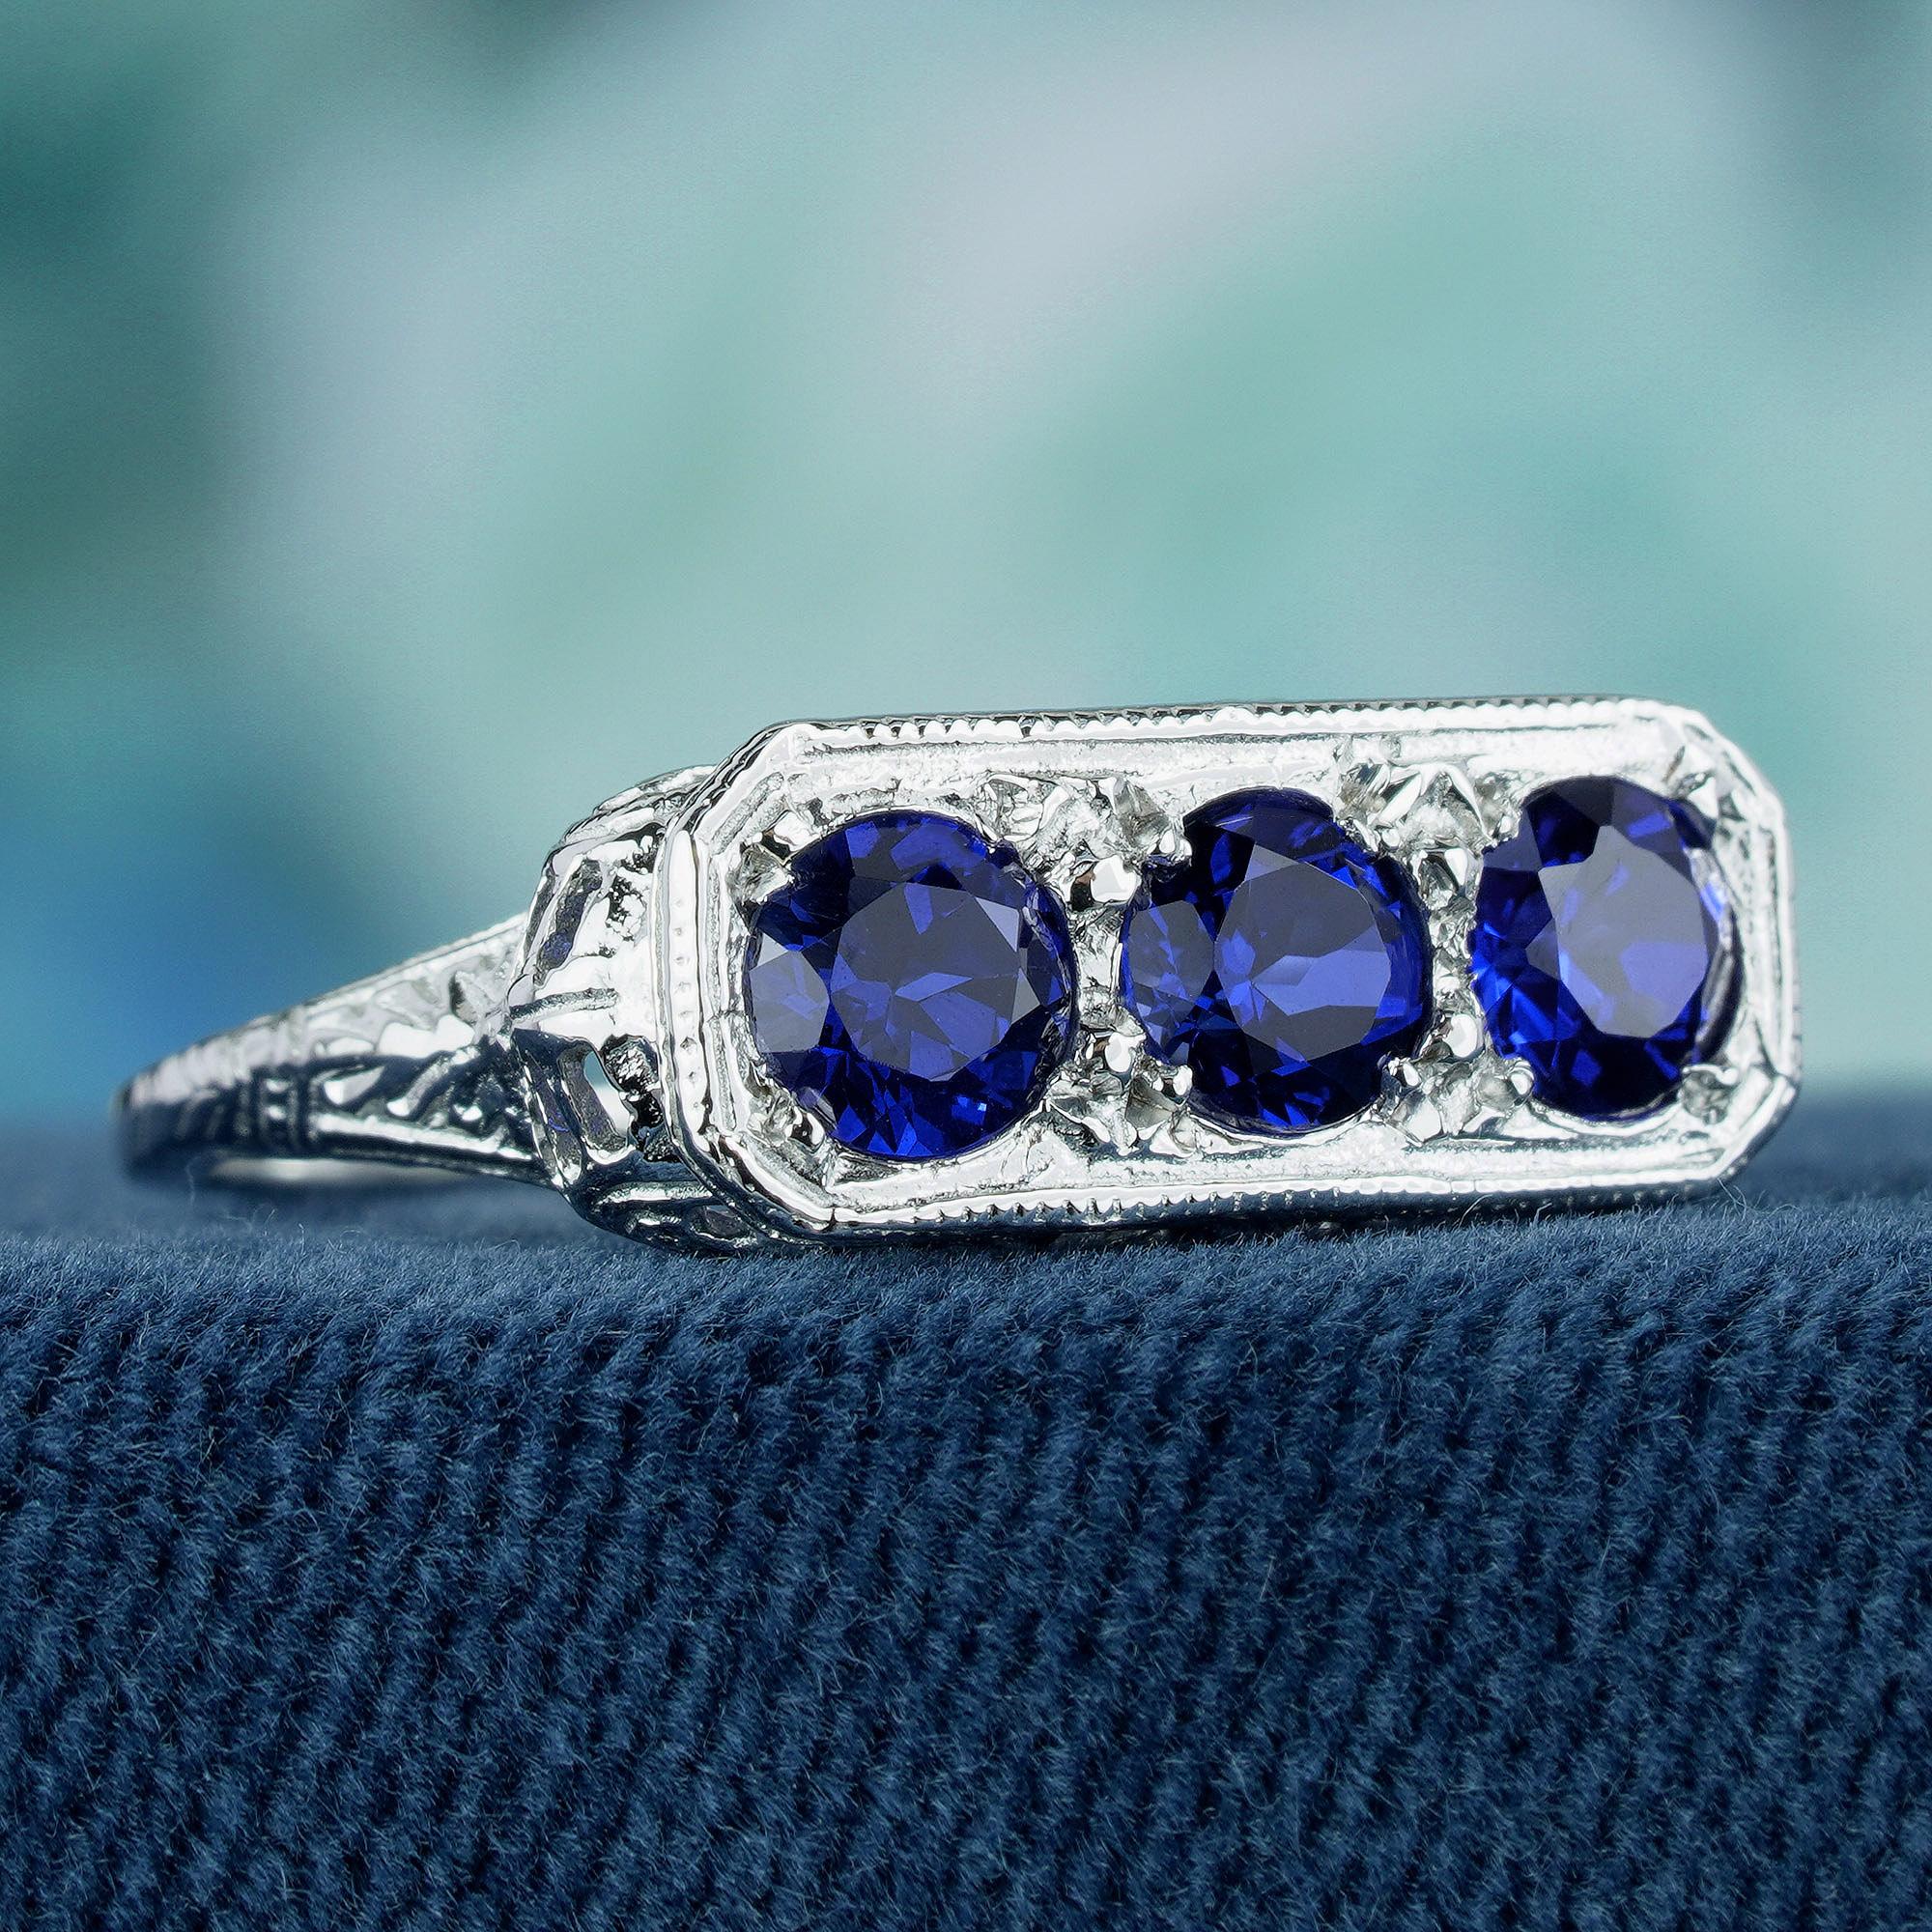 Dazzle with timeless elegance with this exquisite three-stone ring, showcasing mesmerizing round natural blue sapphire gemstones cradled within prongs of a lustrous white gold band. Enhanced with delicate filigree detailing, the ring emanates